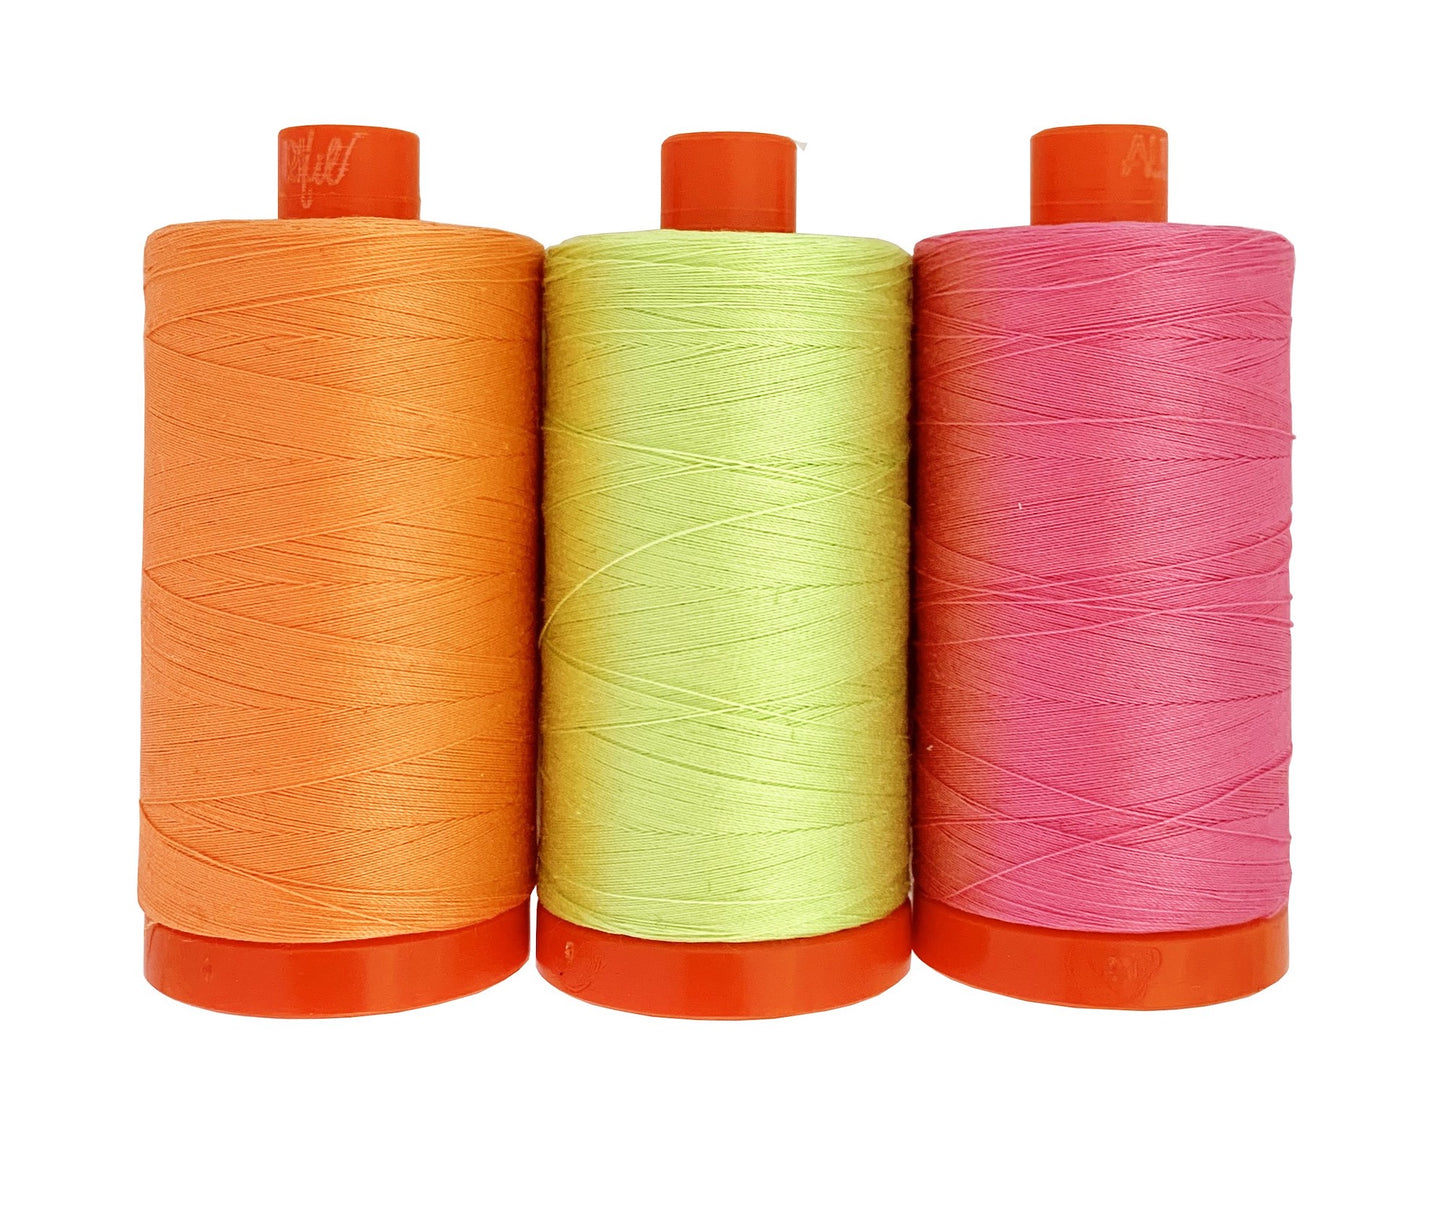 Tula Pink's Neon Limited Edition Thread Set: 3 Large Spools